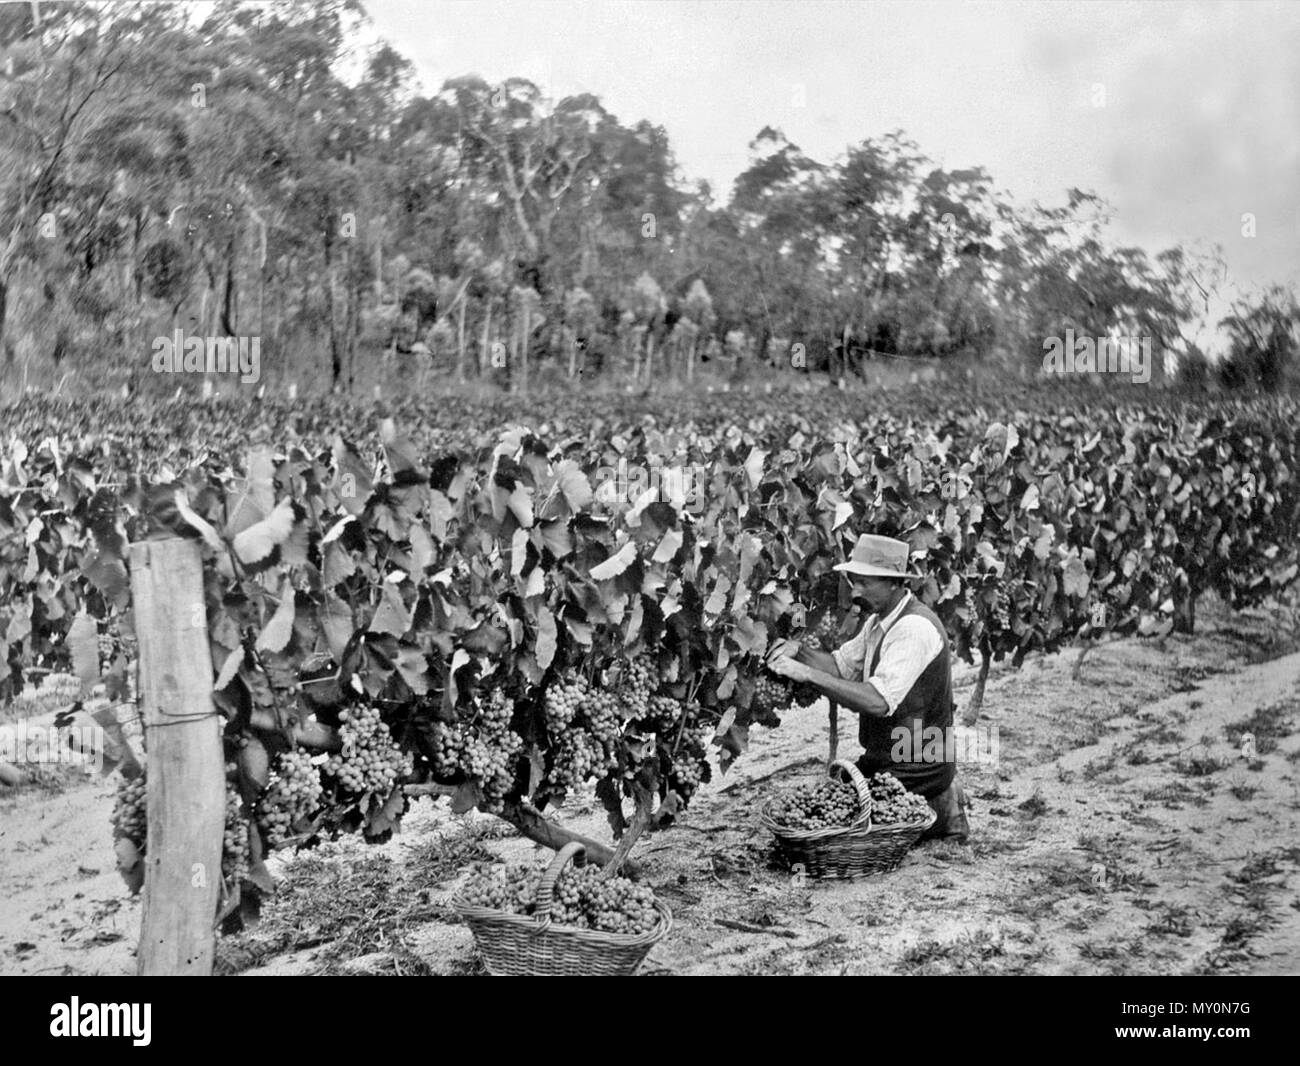 Picking Grapes Ballandean, Stanthorpe, 1924. The Brisbane Courier 22 February 1927  BALLANDEAN 21102063 )   The Grape Crop - Much relief is felt at the lifting of the restrictive regulations concerning the sale of grapes in Brisbane. The low prices and lack of demand consequent on the prosecution of grape vendors in Brisbane for not conforming to the regulation caused consternation amongst growers, many of whom ceased marketing their crop until better prices obtained. Practically no grapes have gone forward to Brisbane for some days. Stock Photo